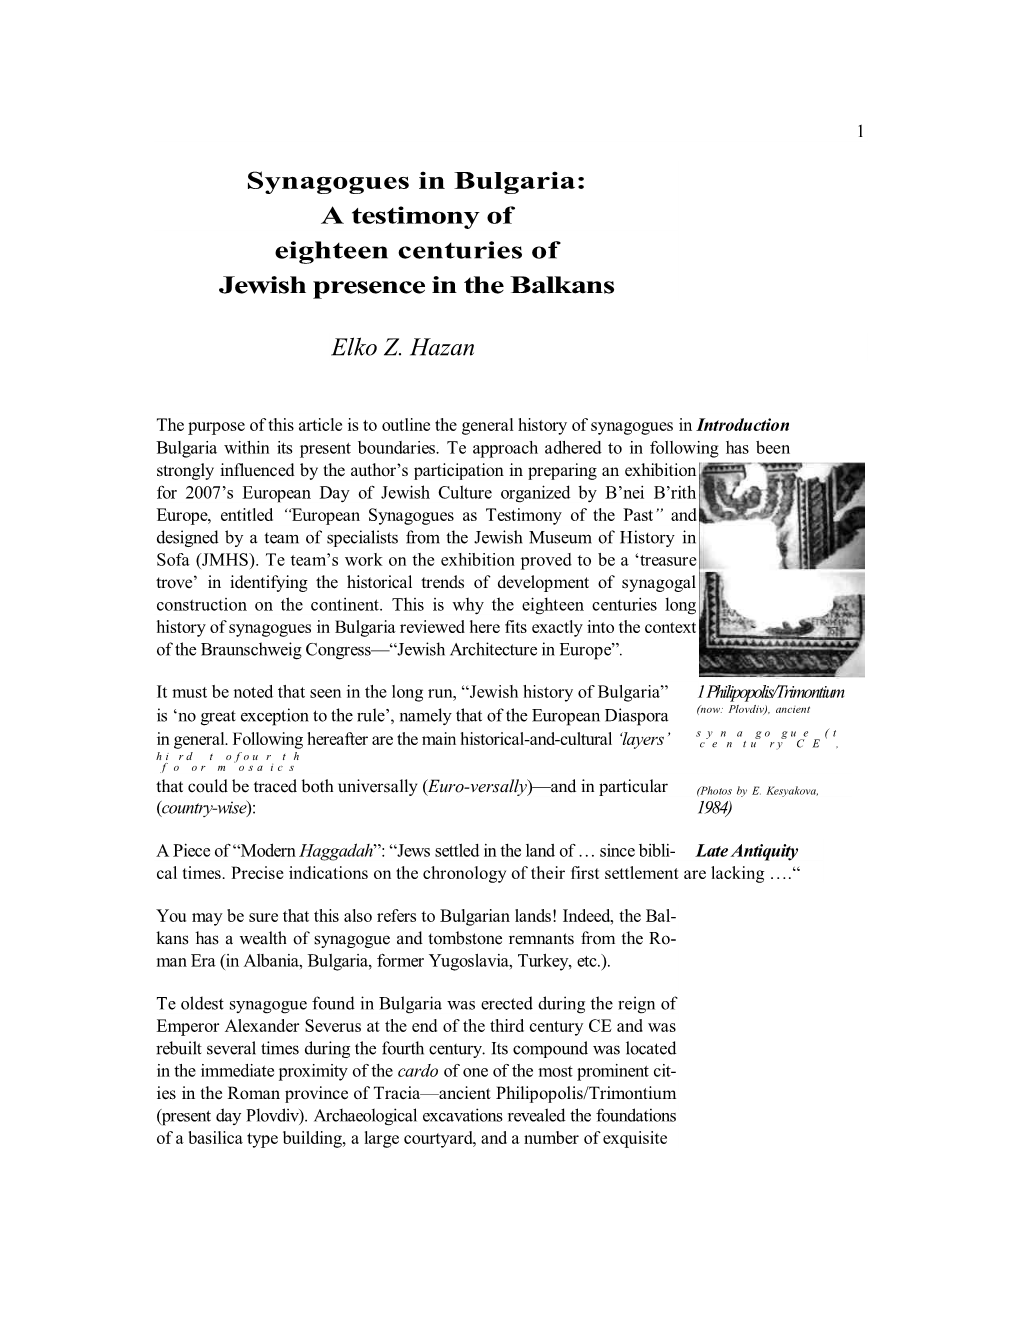 Synagogues in Bulgaria: a Testimony of Eighteen Centuries of Jewish Presence in the Balkans